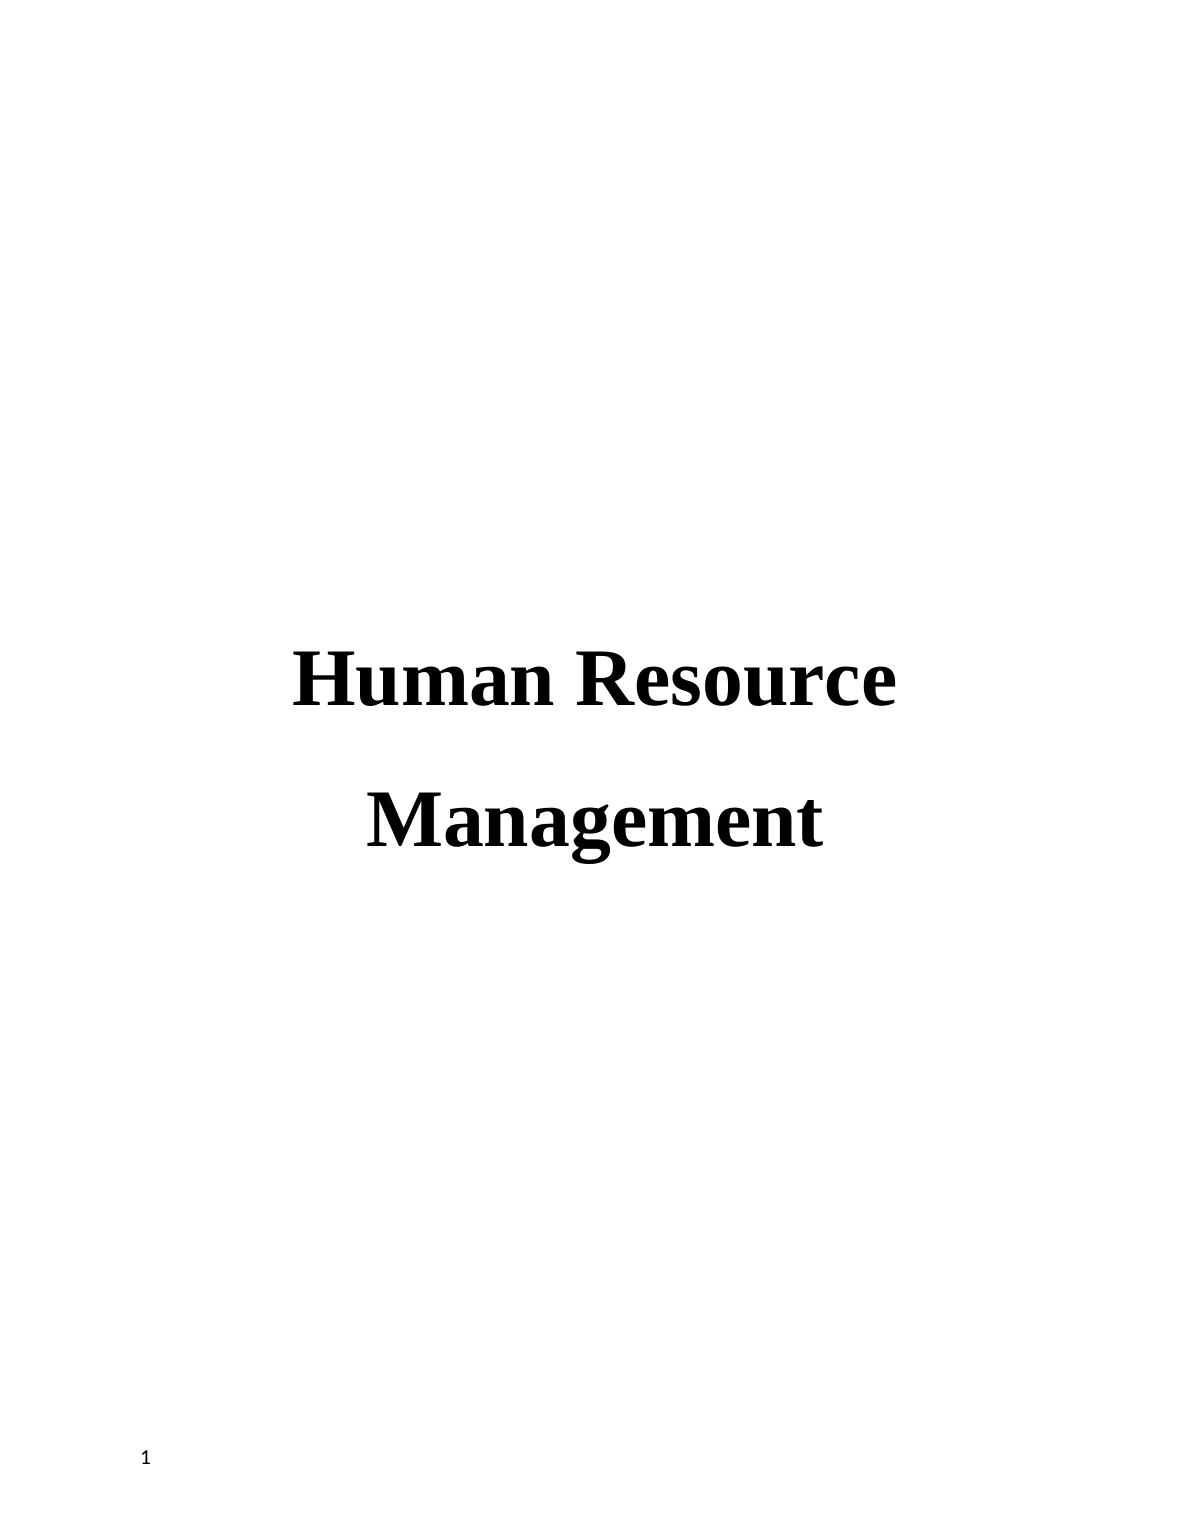 Purpose of Human Resource Management (HRM) Assignment_1